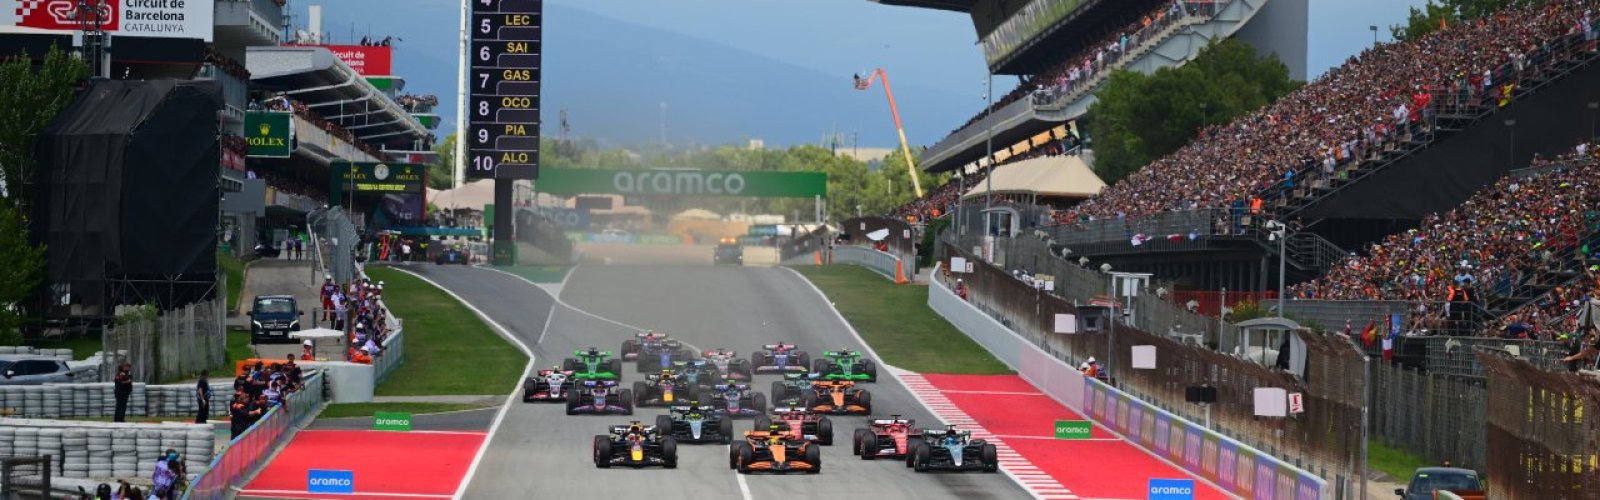 Spanish Formula 1 Grand Prix ticket package for F1 fans to experience the pinnacle of motorsport live at Circuit de Barcelona-Catalunya image